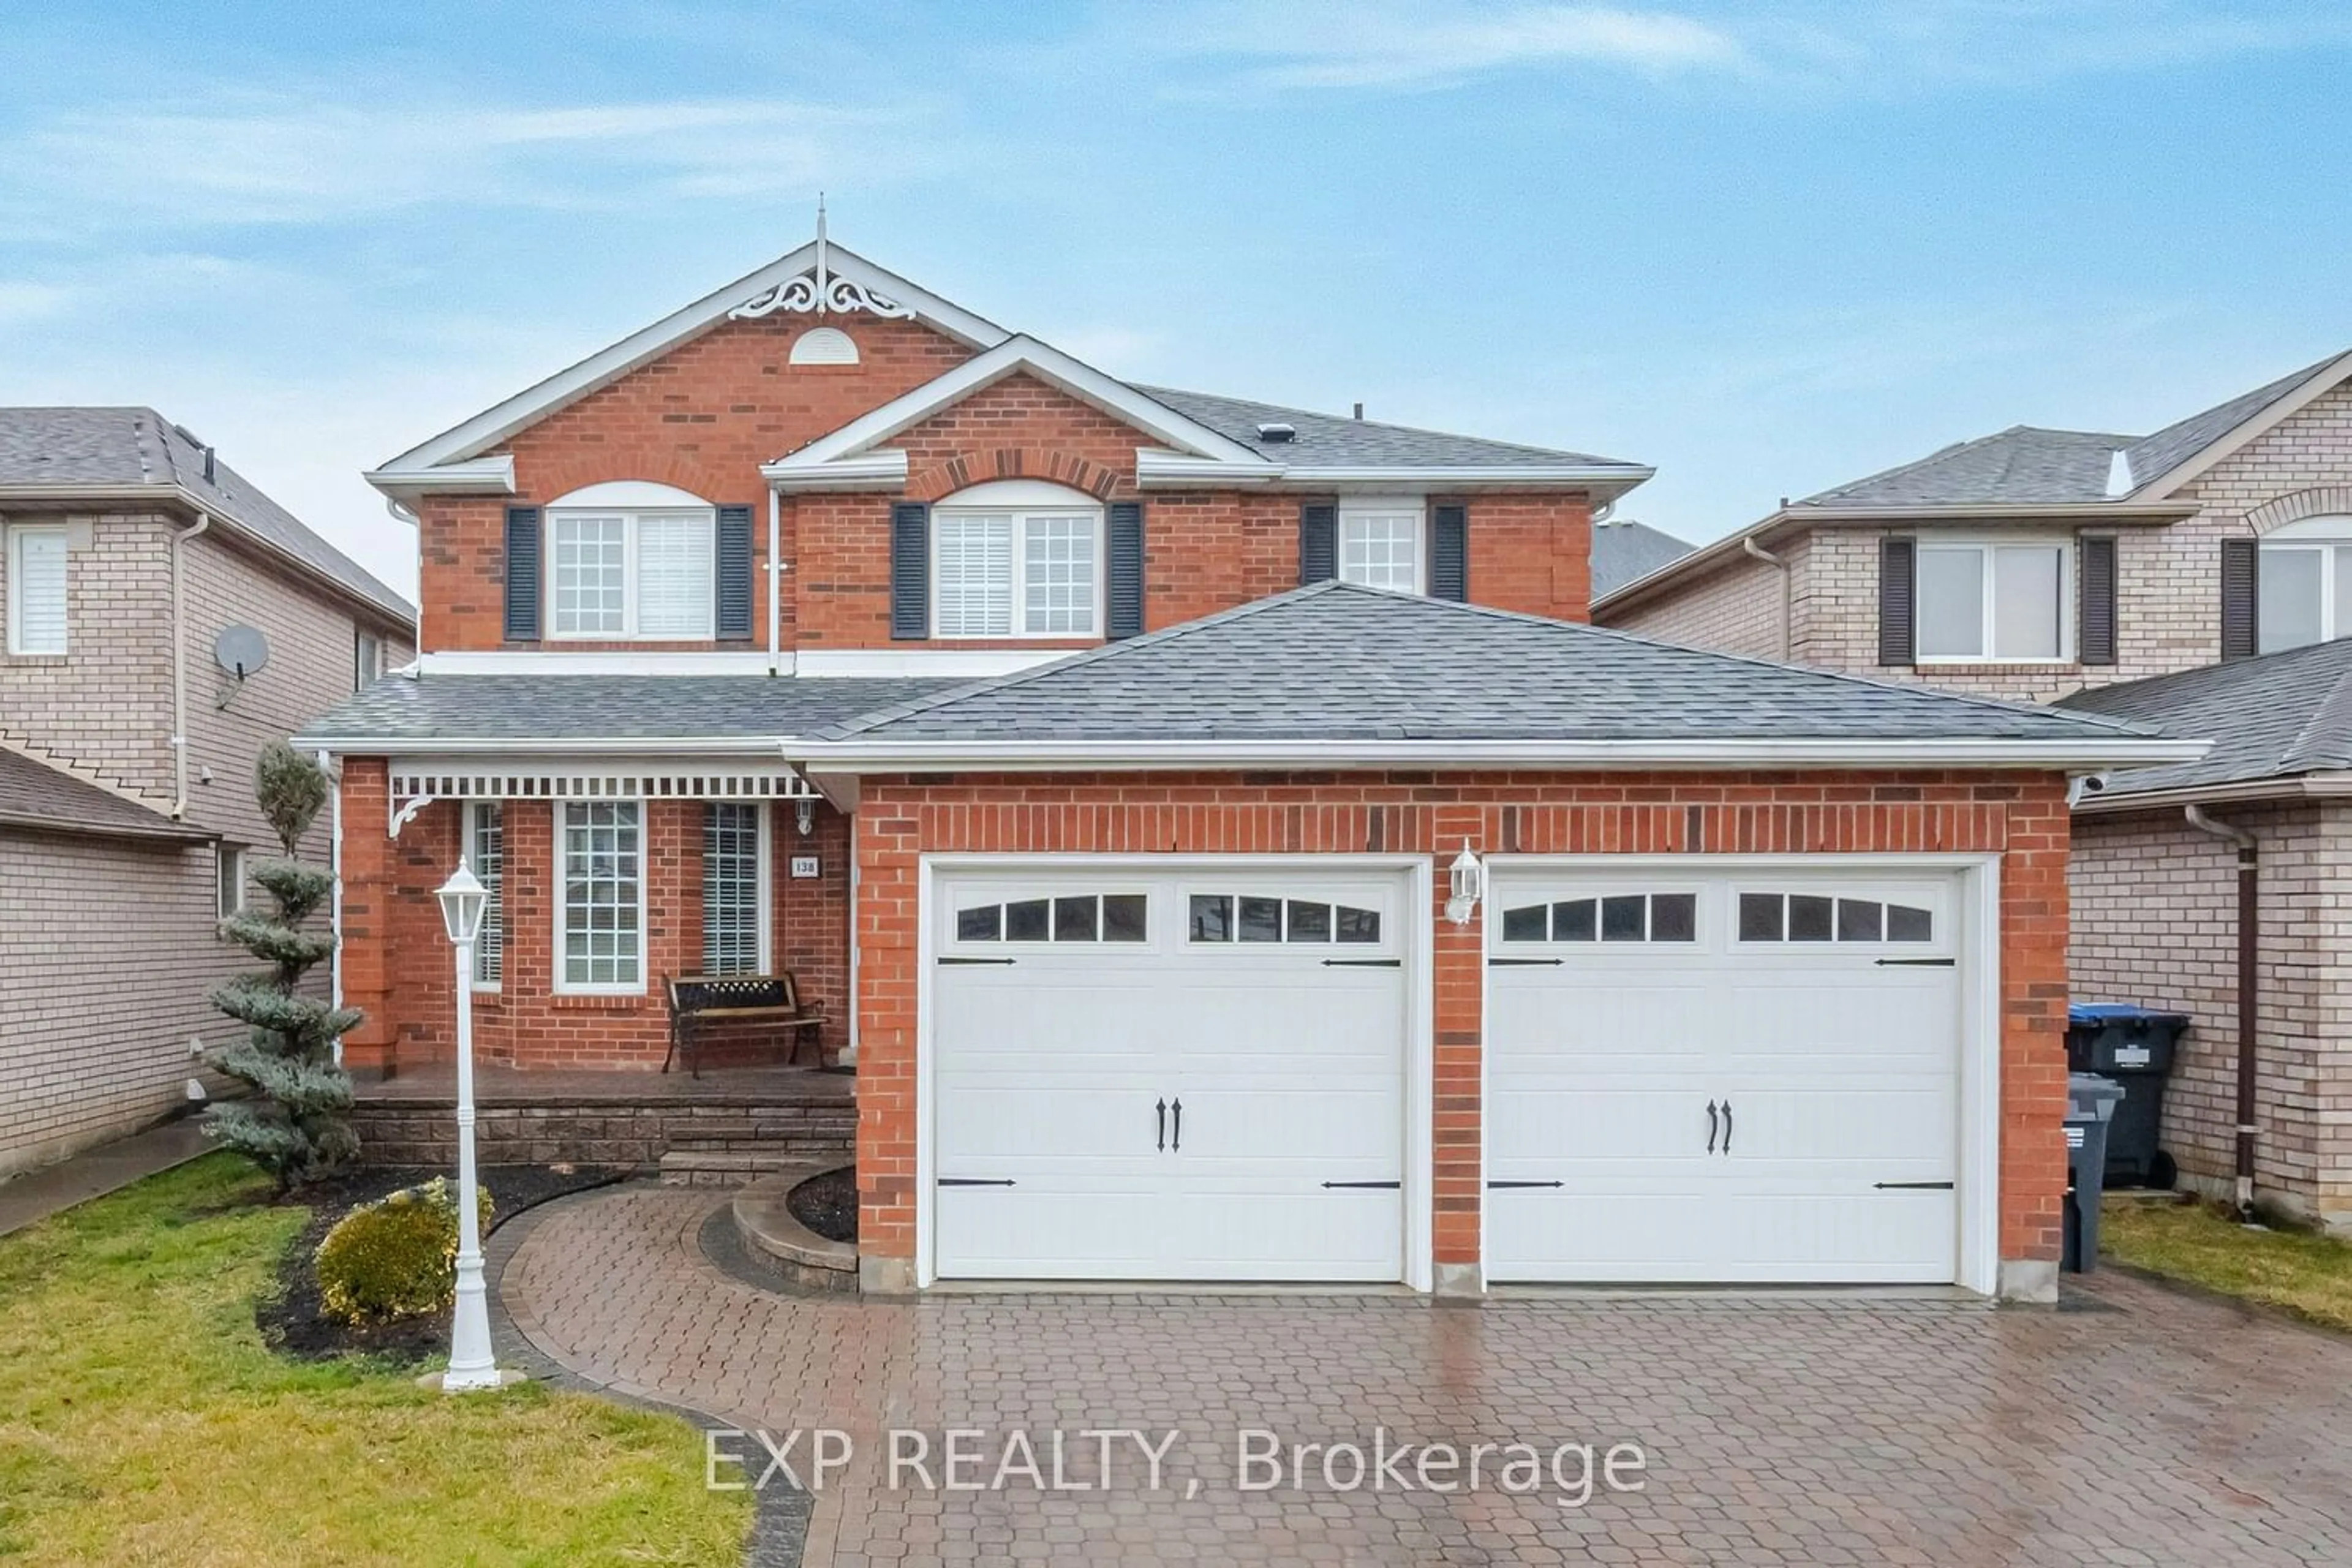 Frontside or backside of a home for 138 Moffatt Ave, Brampton Ontario L6Y 4R8